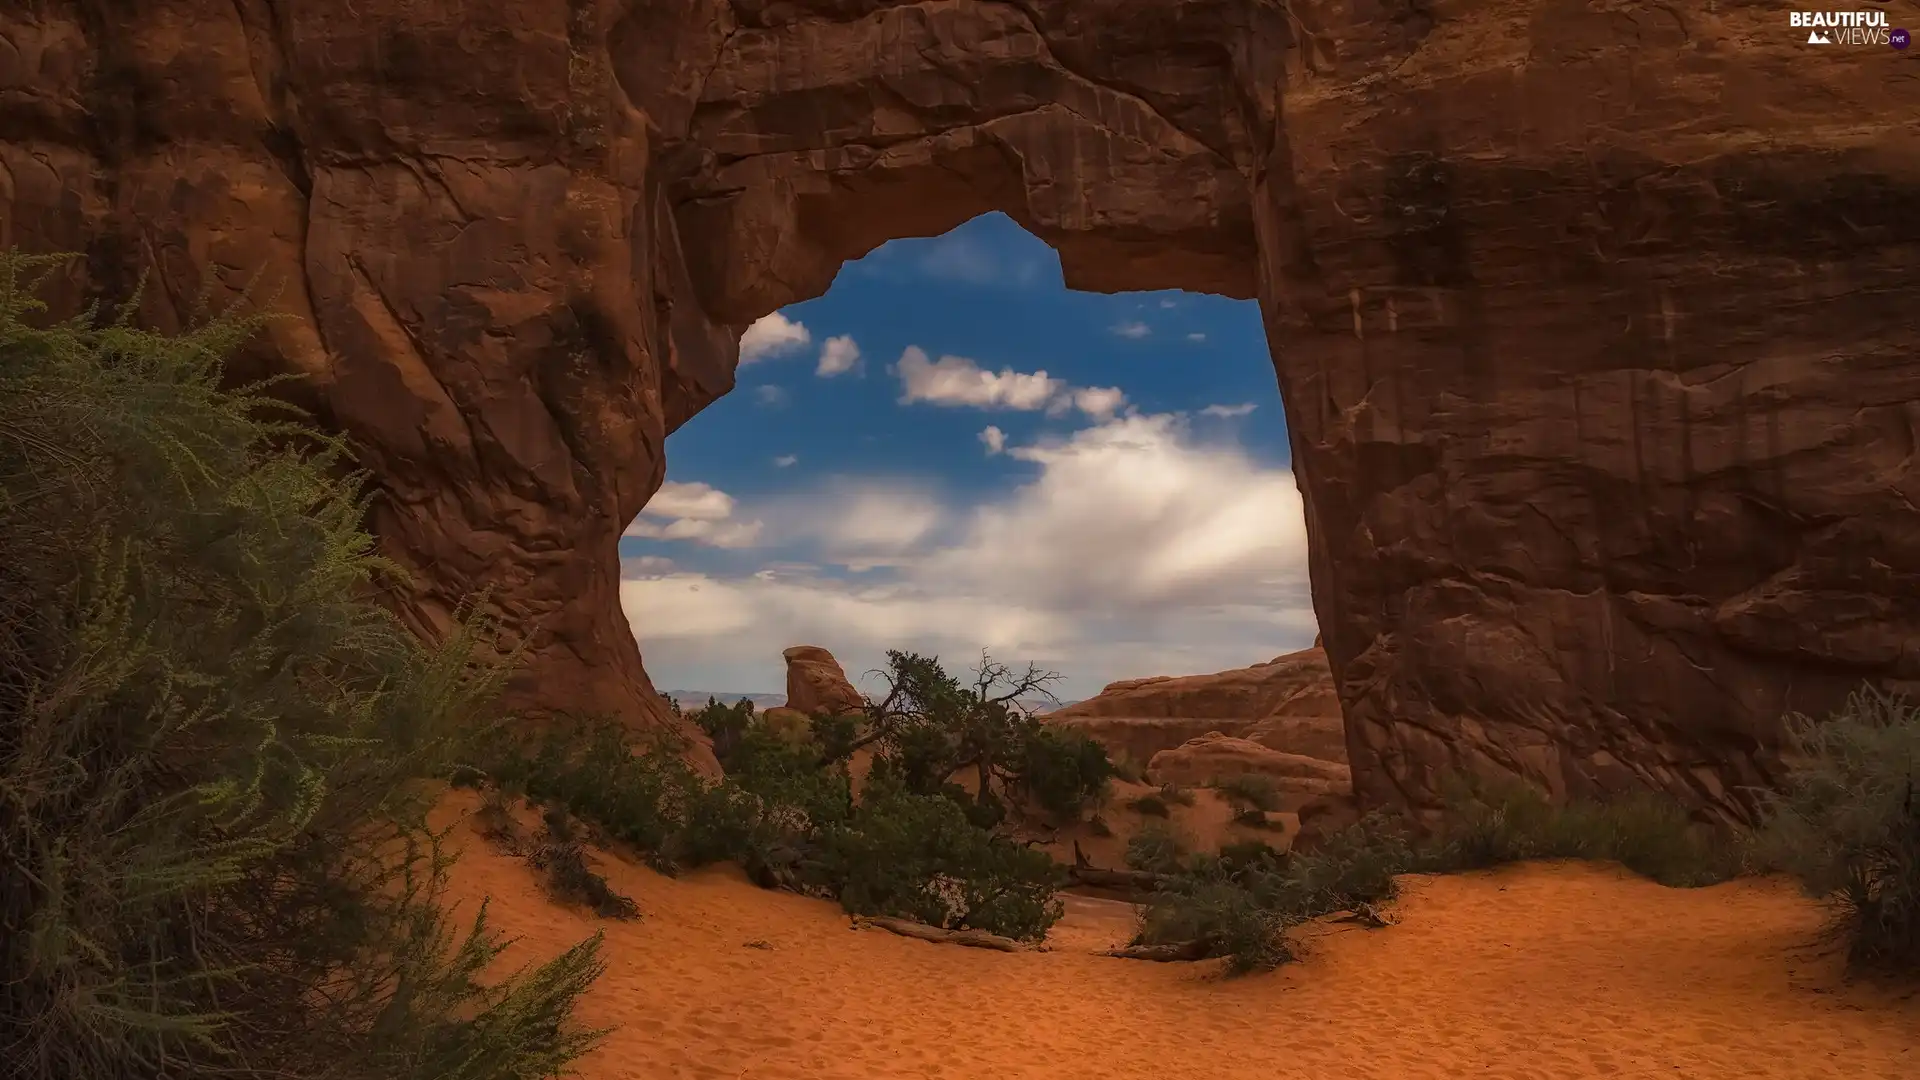 Utah State, The United States, Plants, Arches National Park, rocks